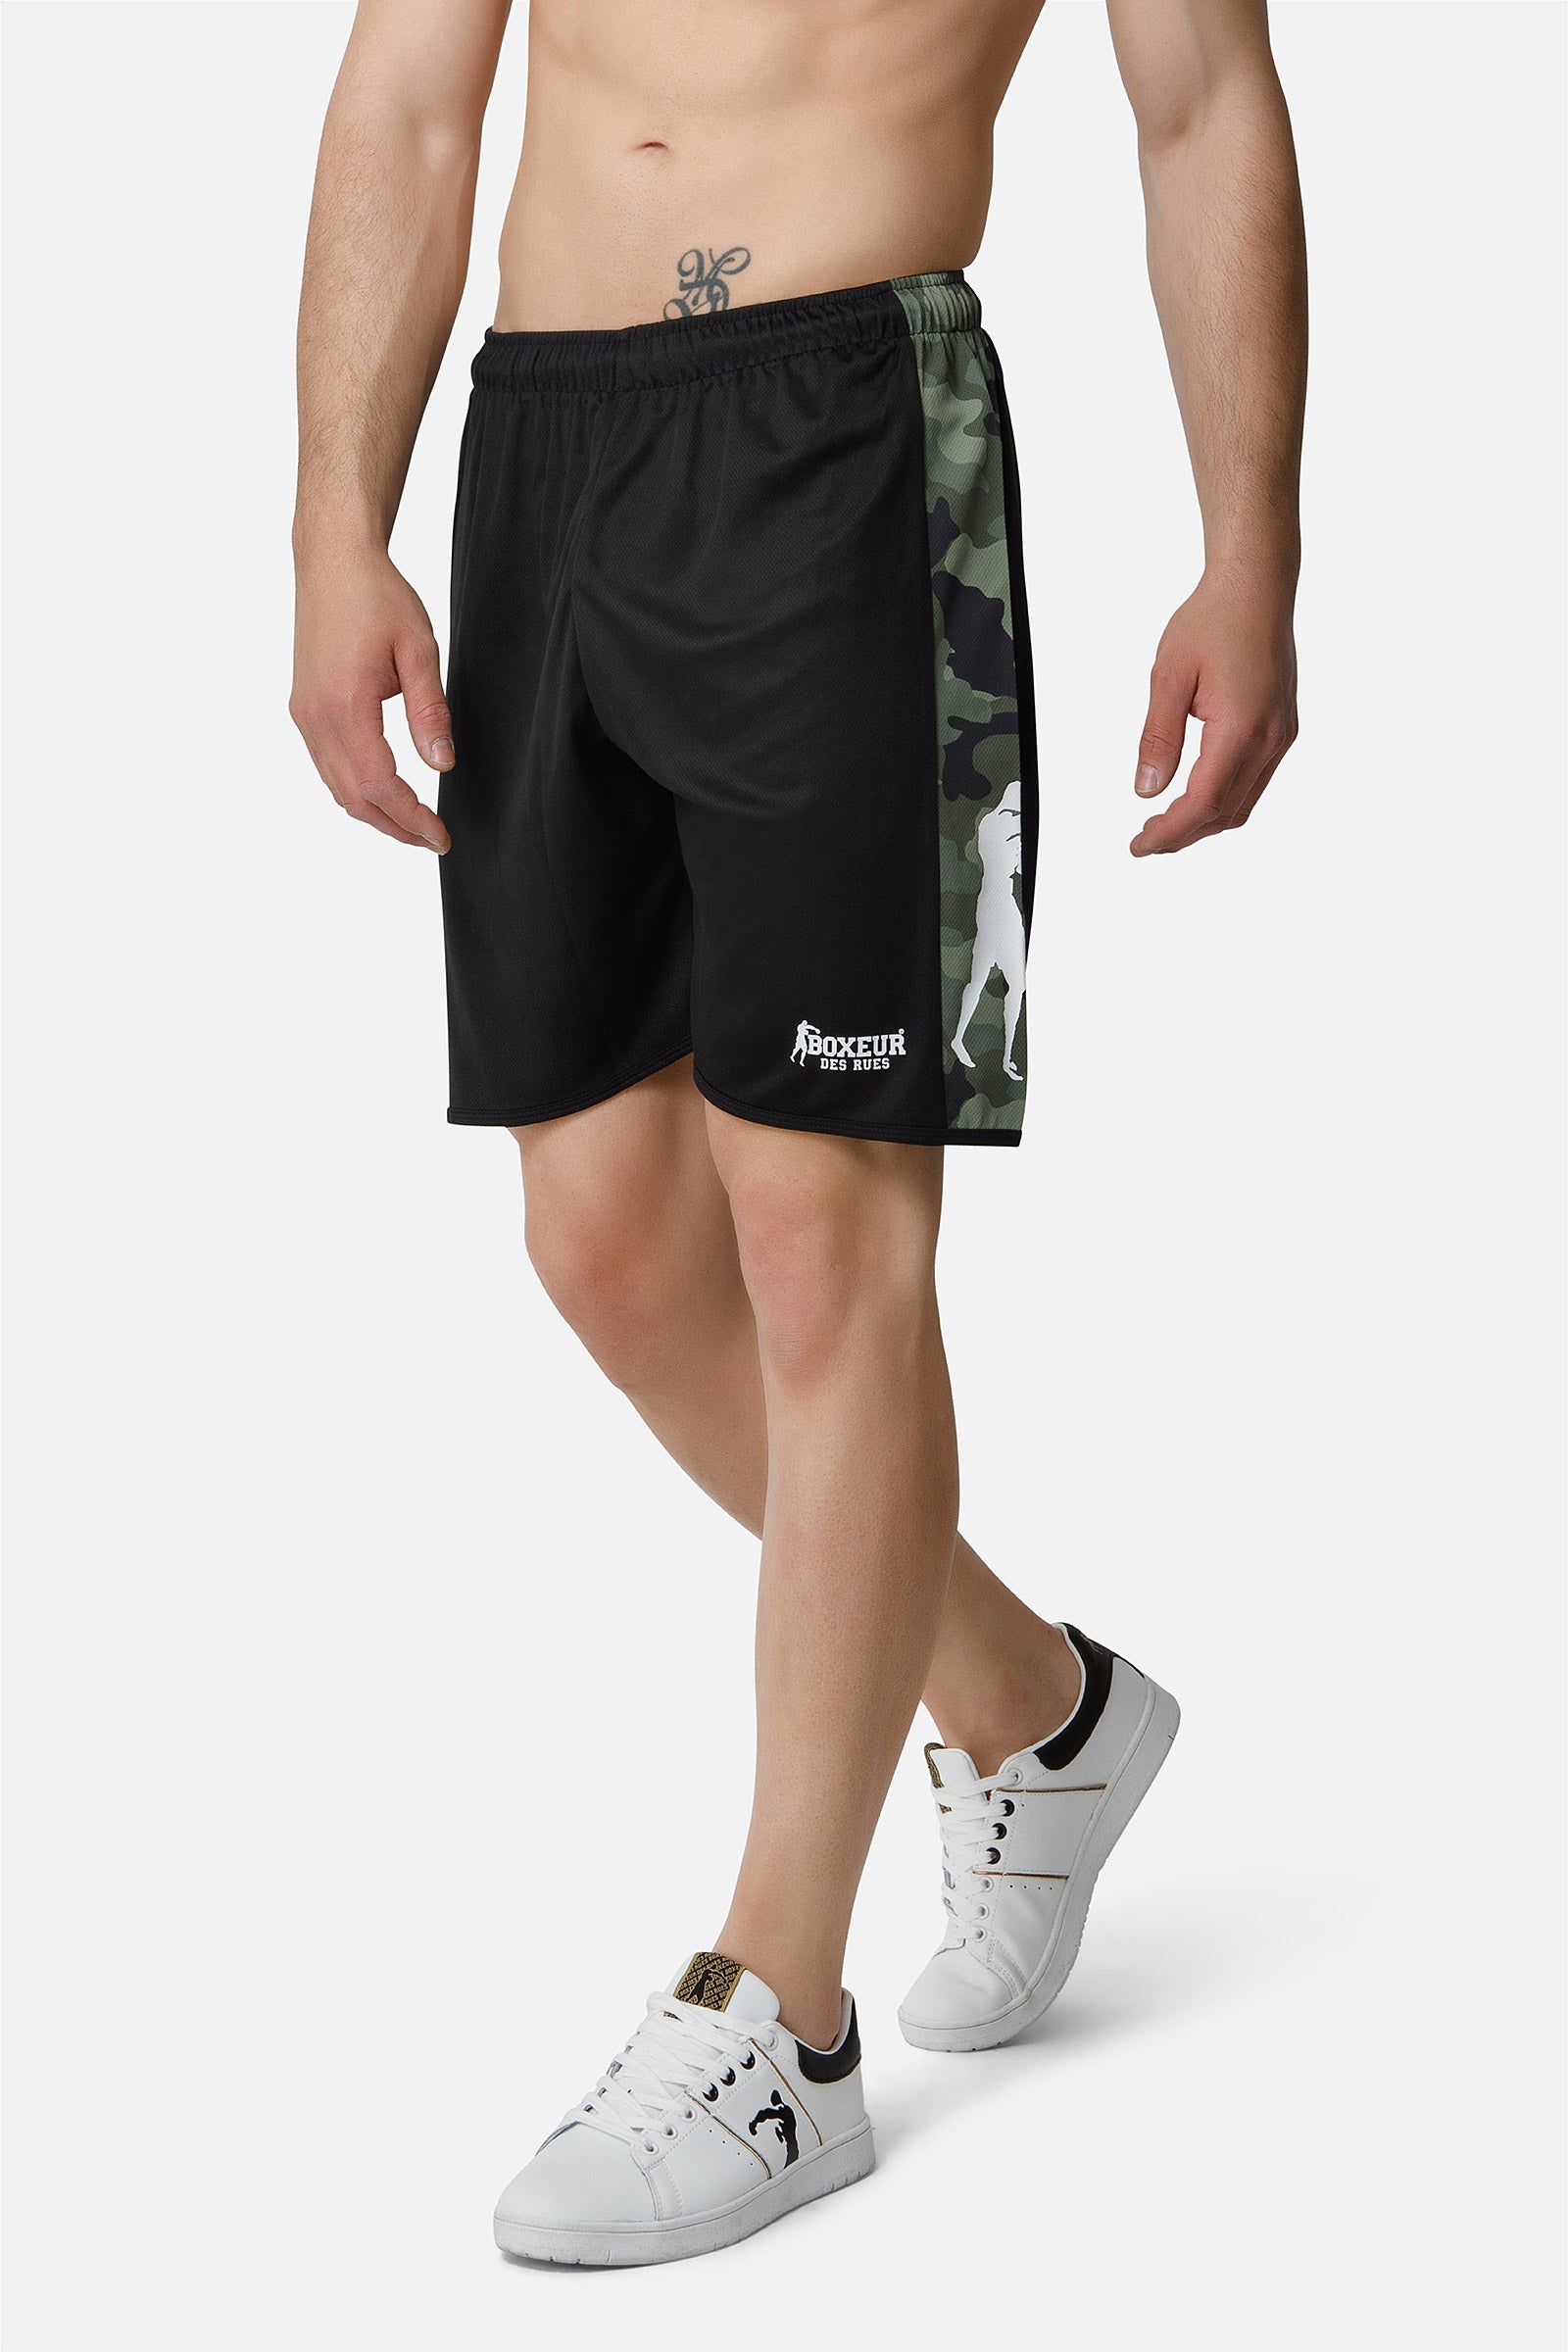 Soccer Basic Shorts in Camou Shorts Boxeur des Rues   